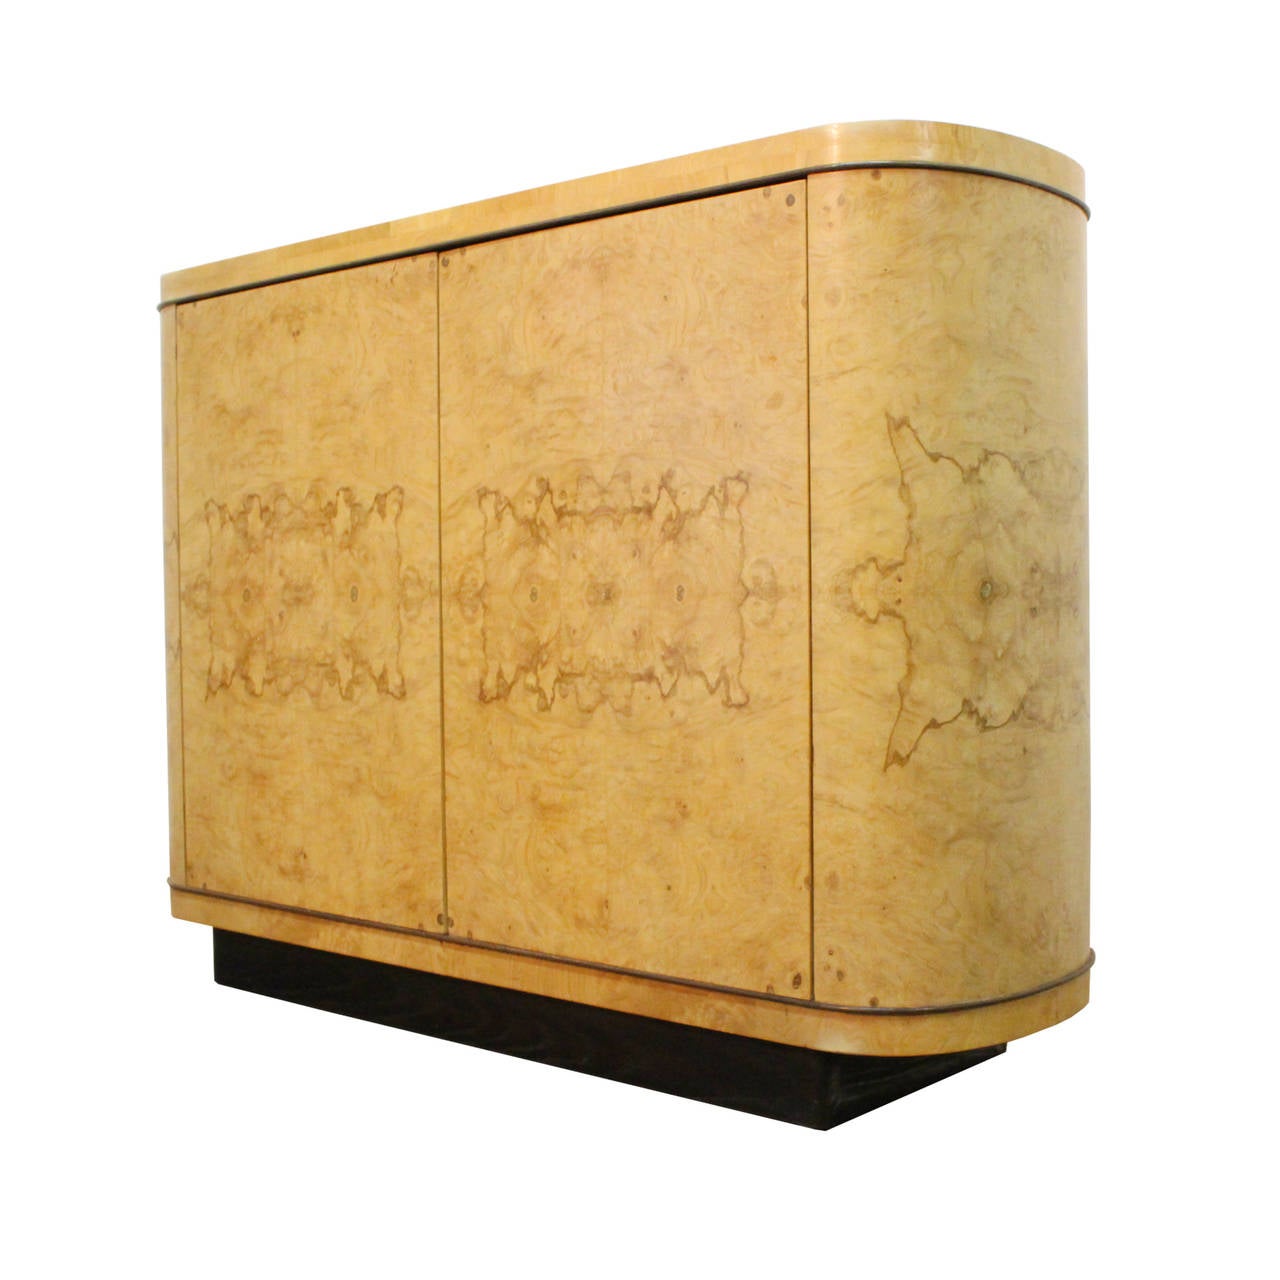 Milo Baughman gorgeous credenza. Perfect size for an entry. Matchbook burl wood. Cabinet doors open up to storage with shelving.

Dimemsions: 44